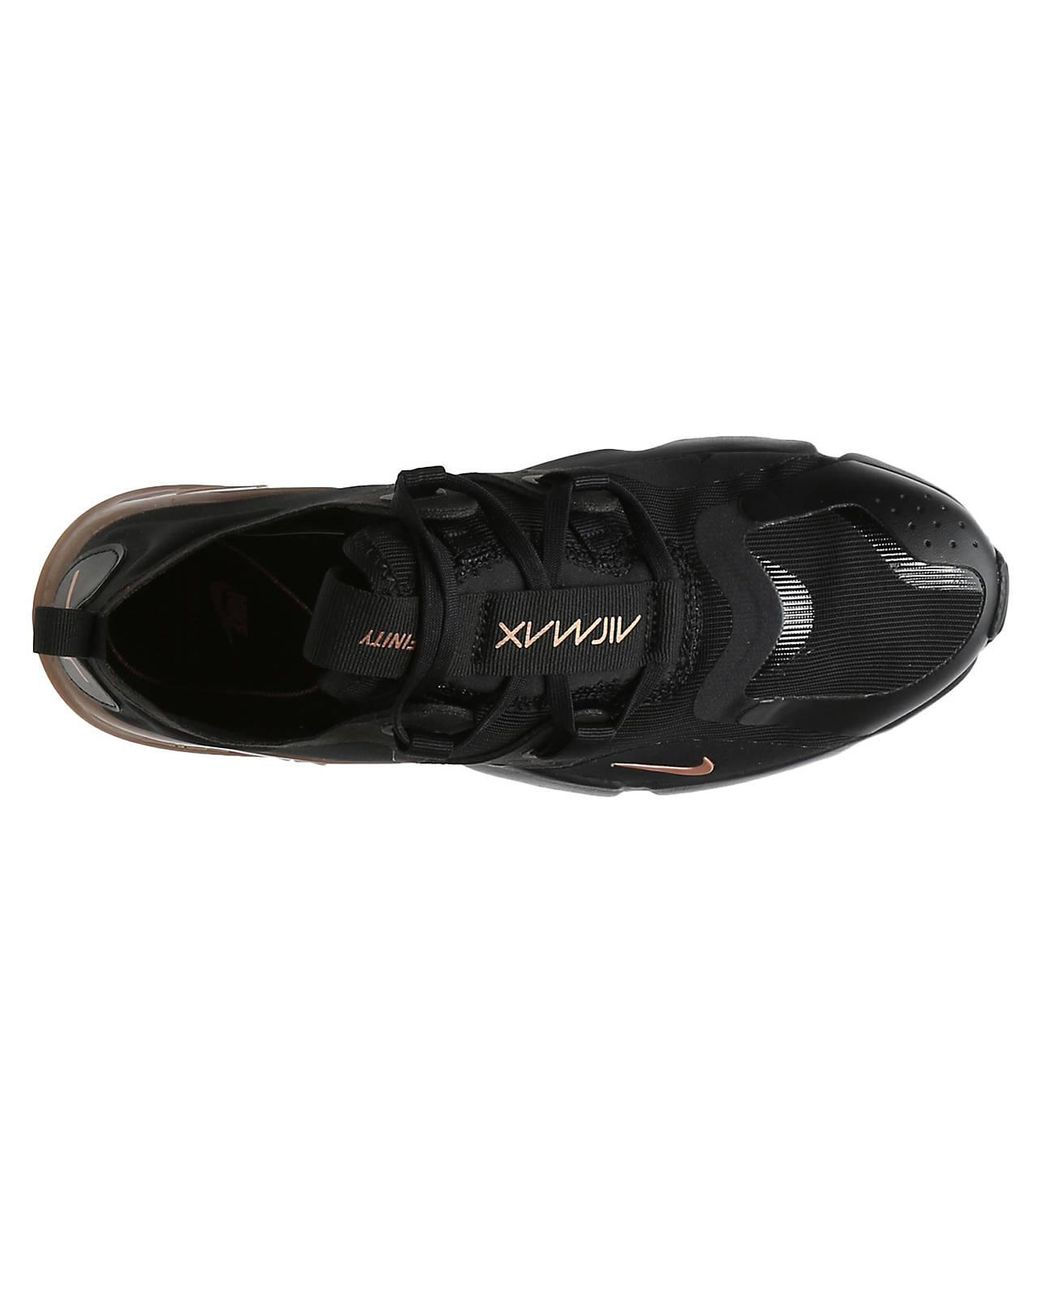 Nike Synthetic Air Max Infinity Sneaker in Black/Rose Gold (Black) | Lyst